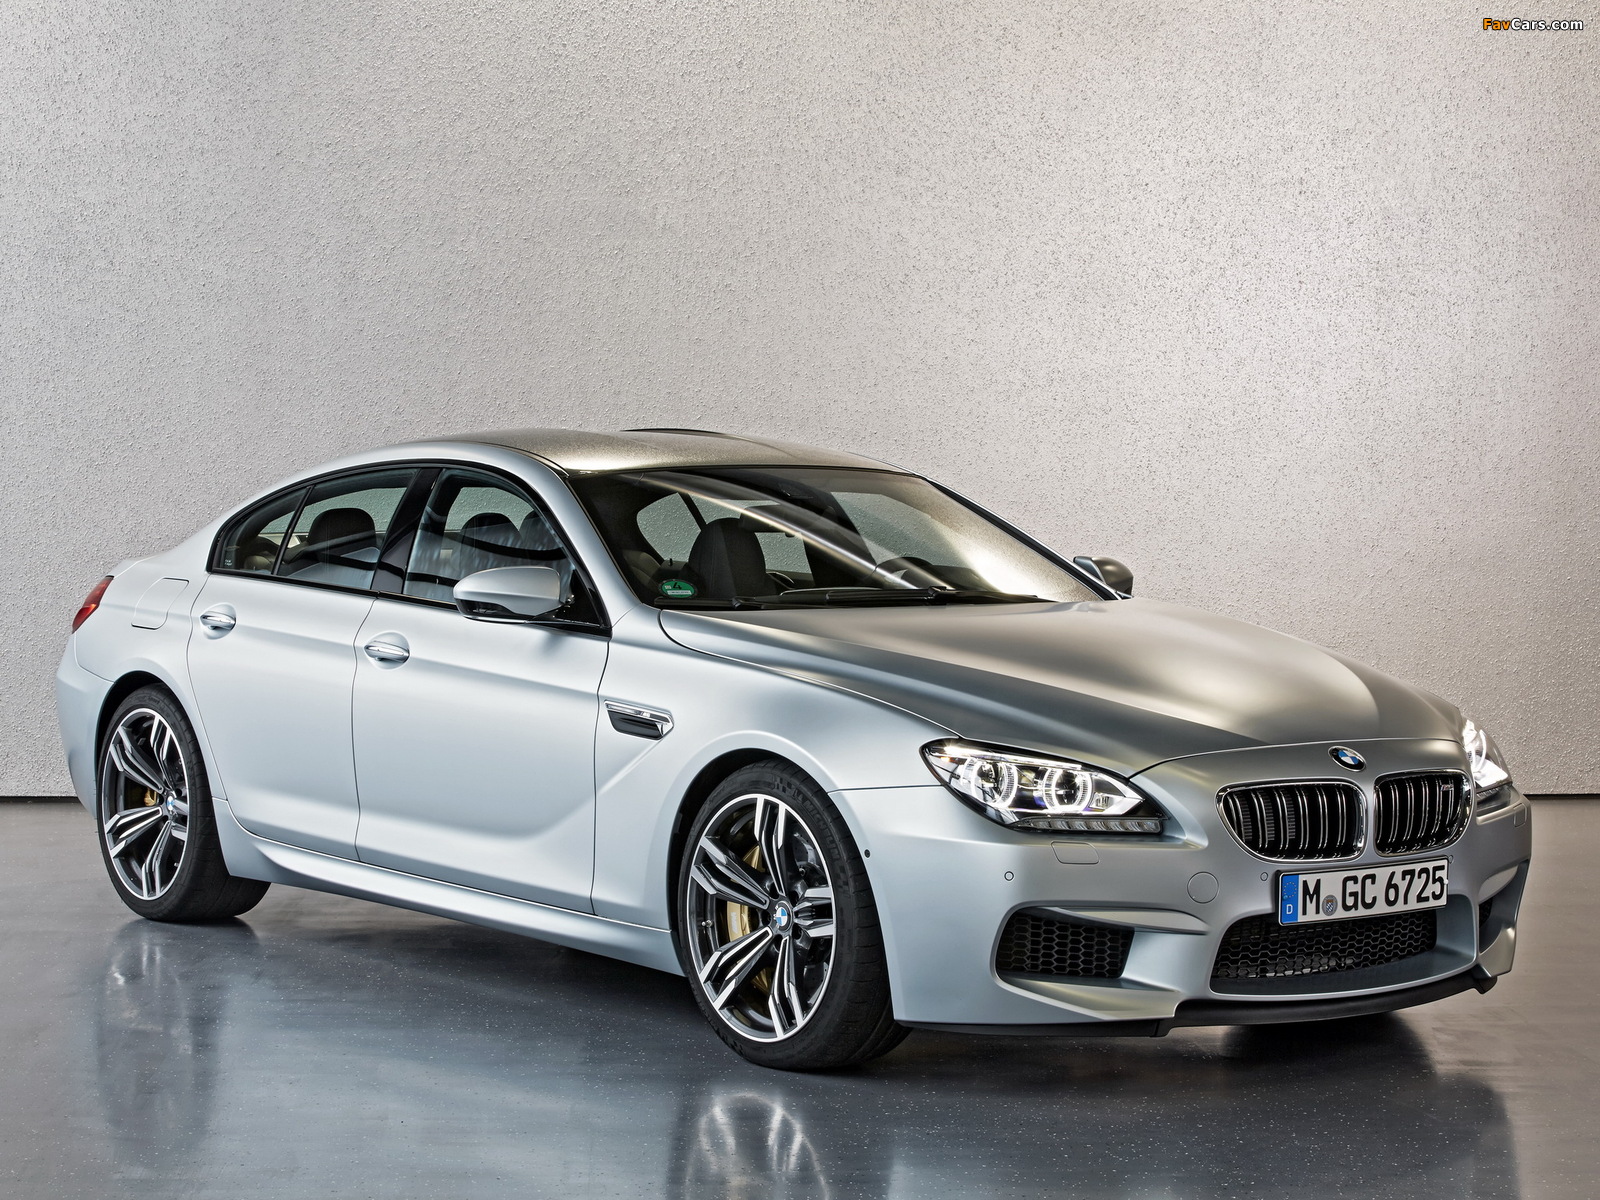 BMW M6 Gran Coupe (F06) 2013 images (1600 x 1200)